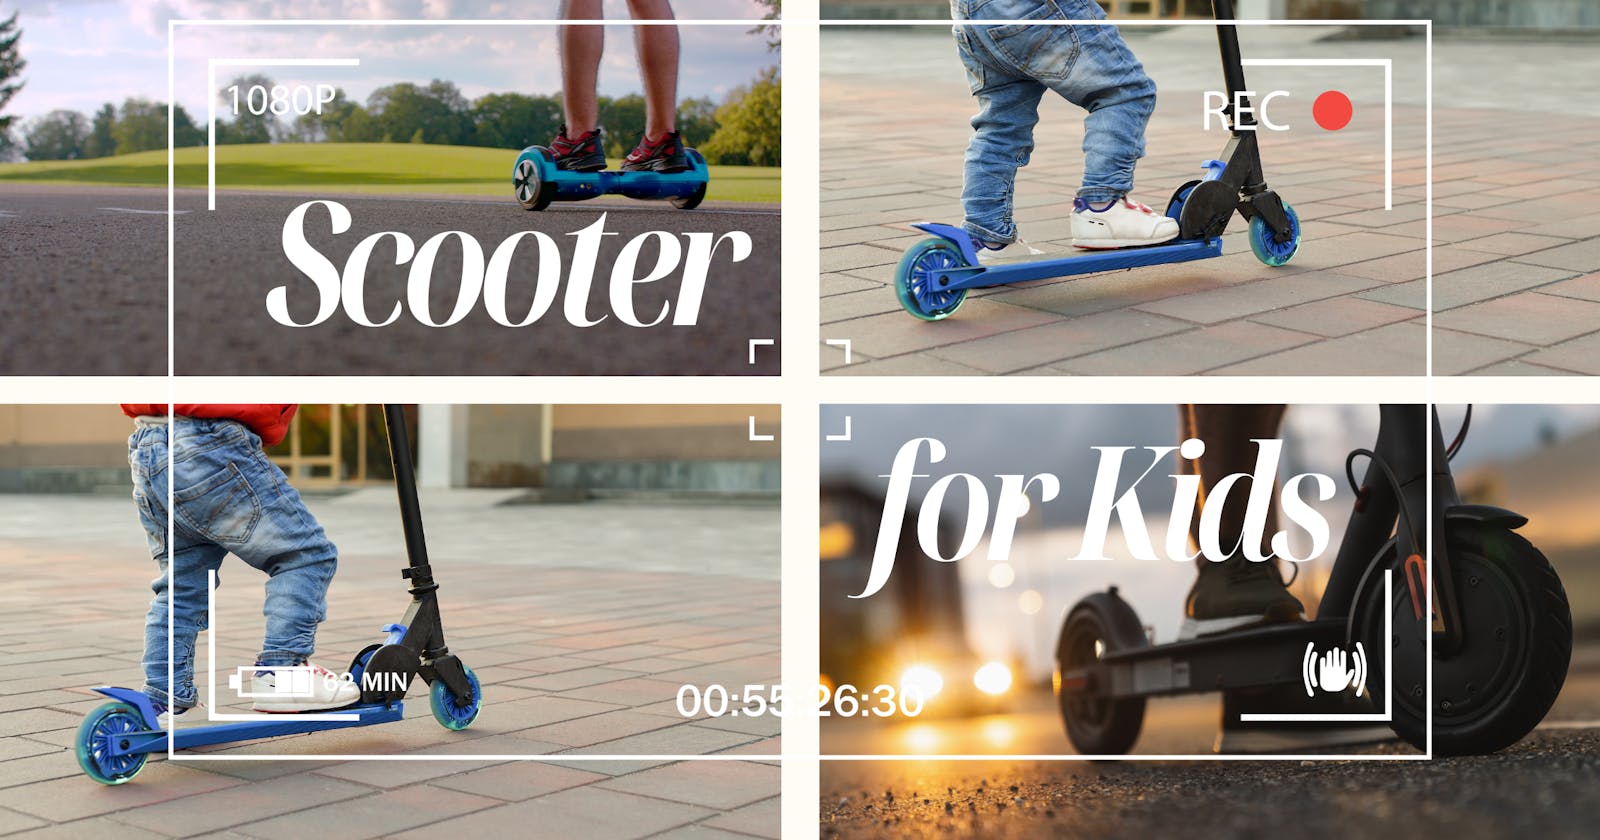 Reasons Behind the Popularity of Self Balancing Scooter Among Kids